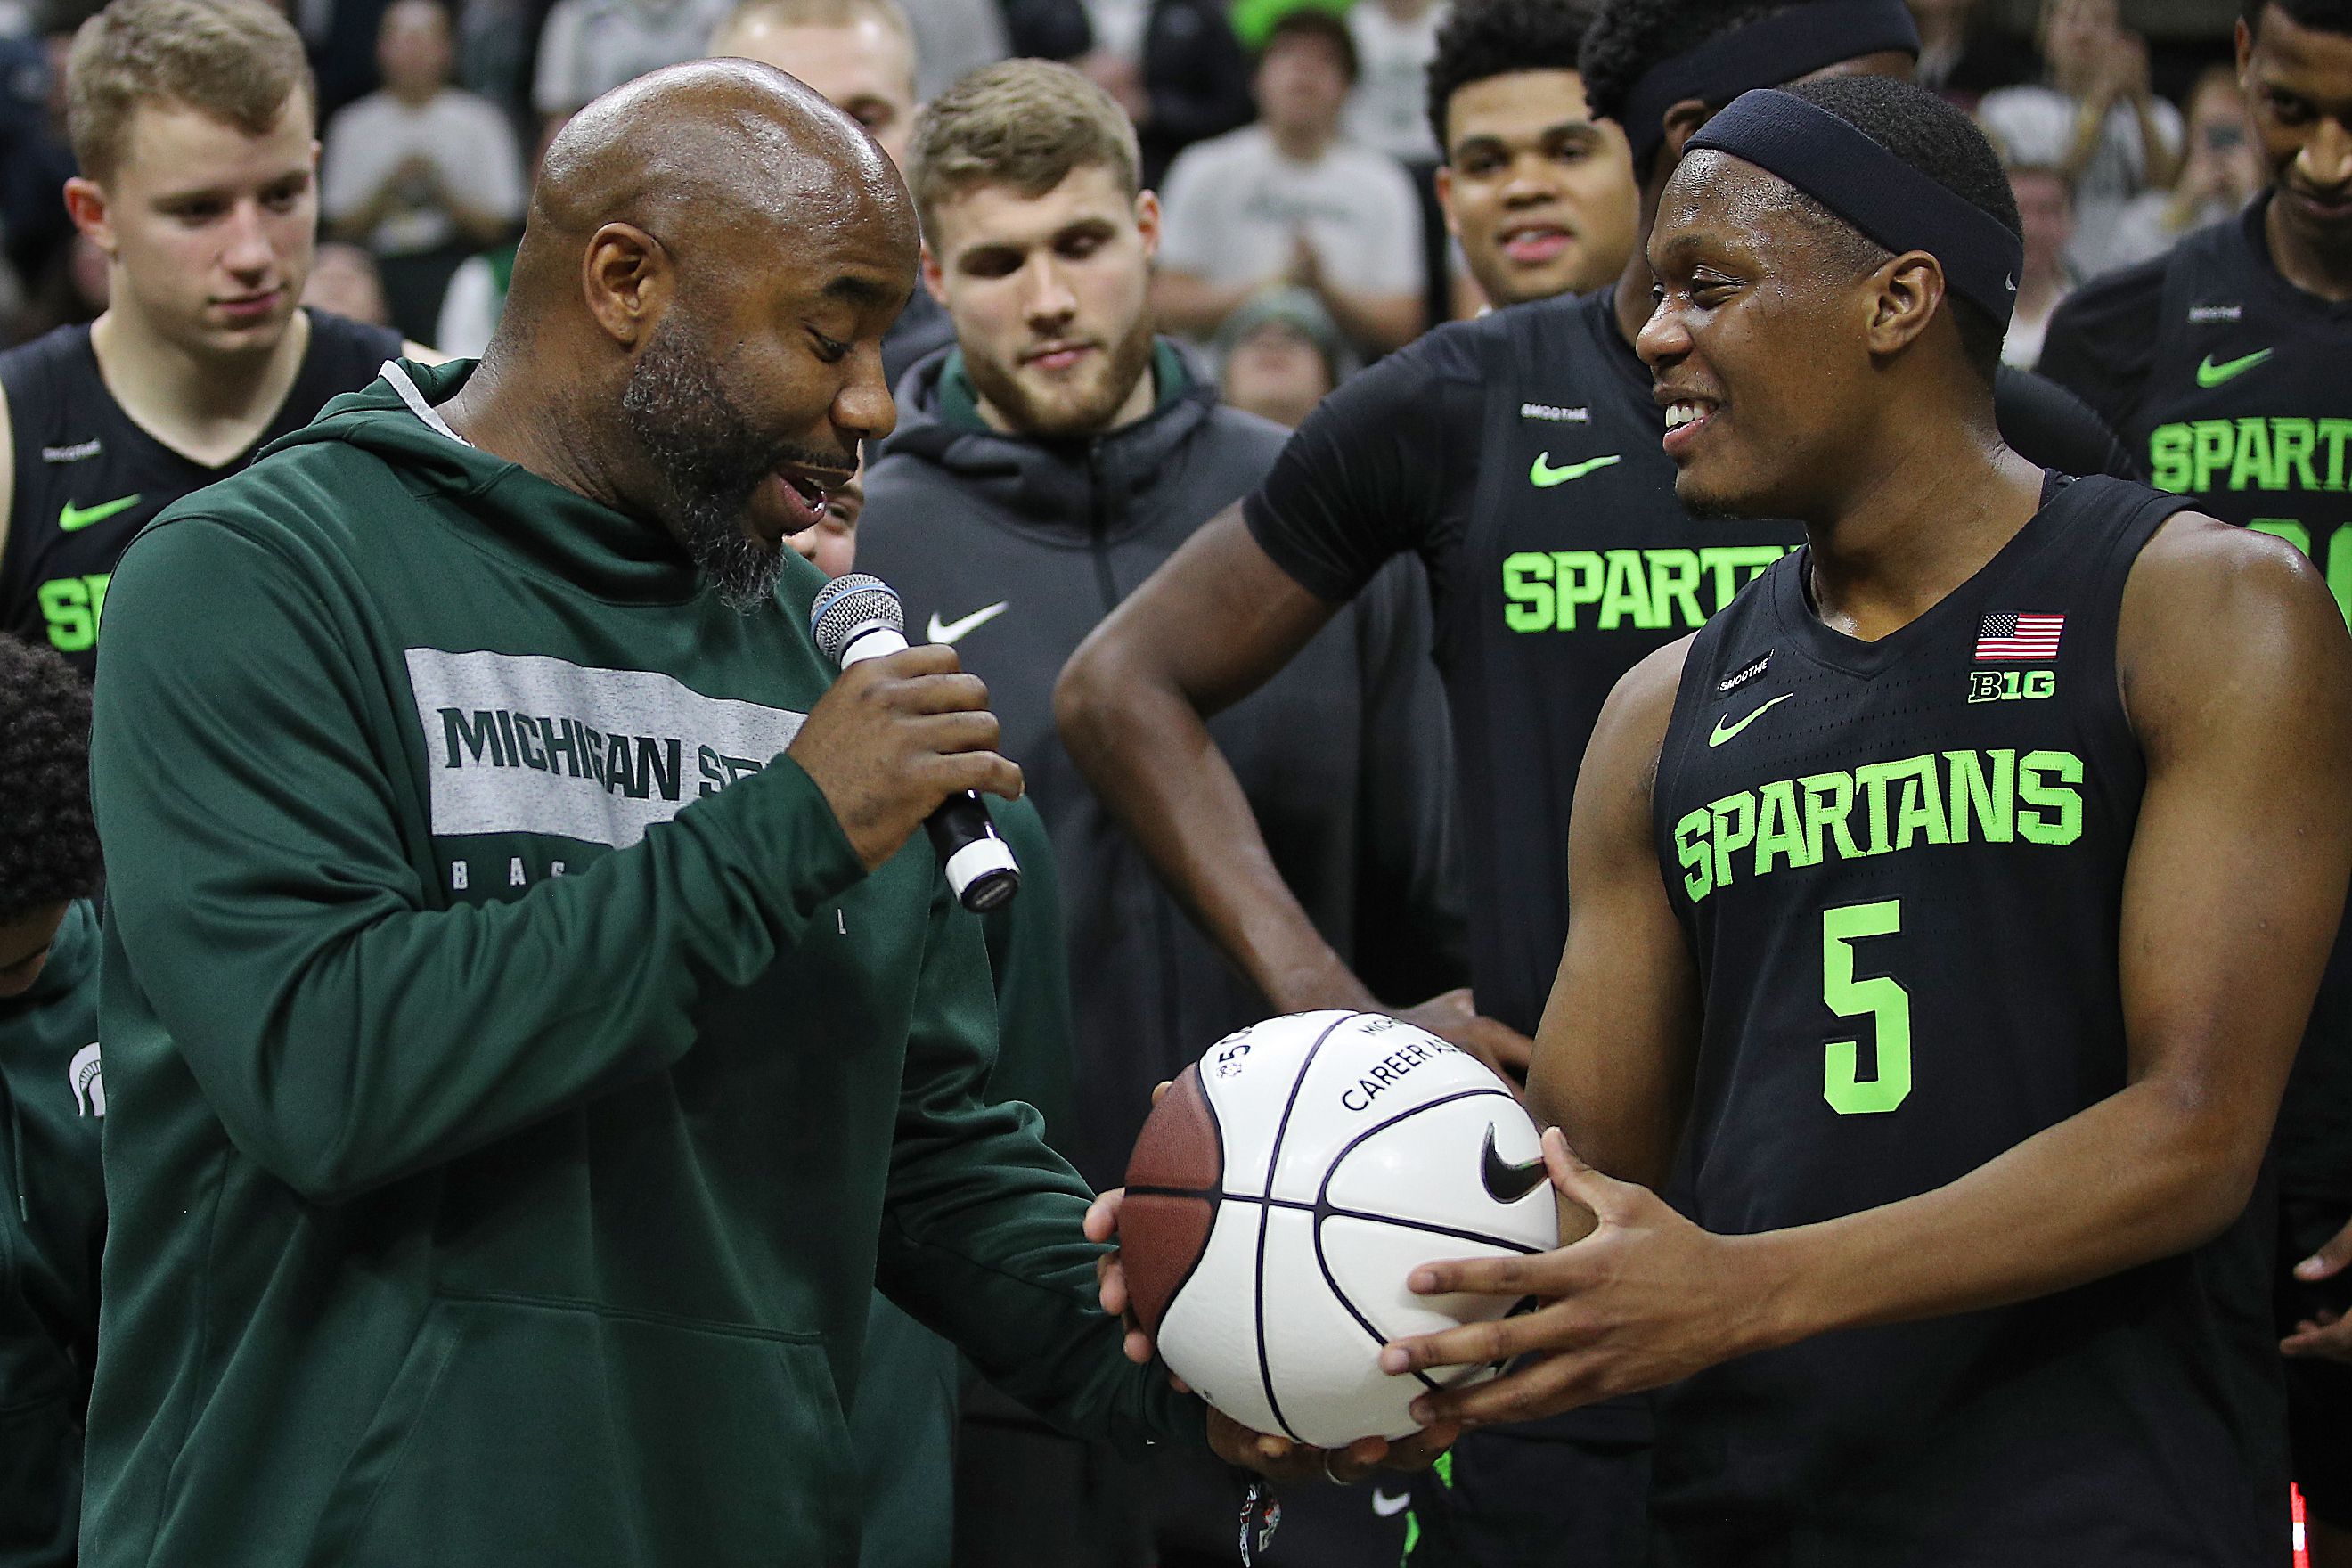 Michigan State's Cassius Winston has chance to join Mateen and